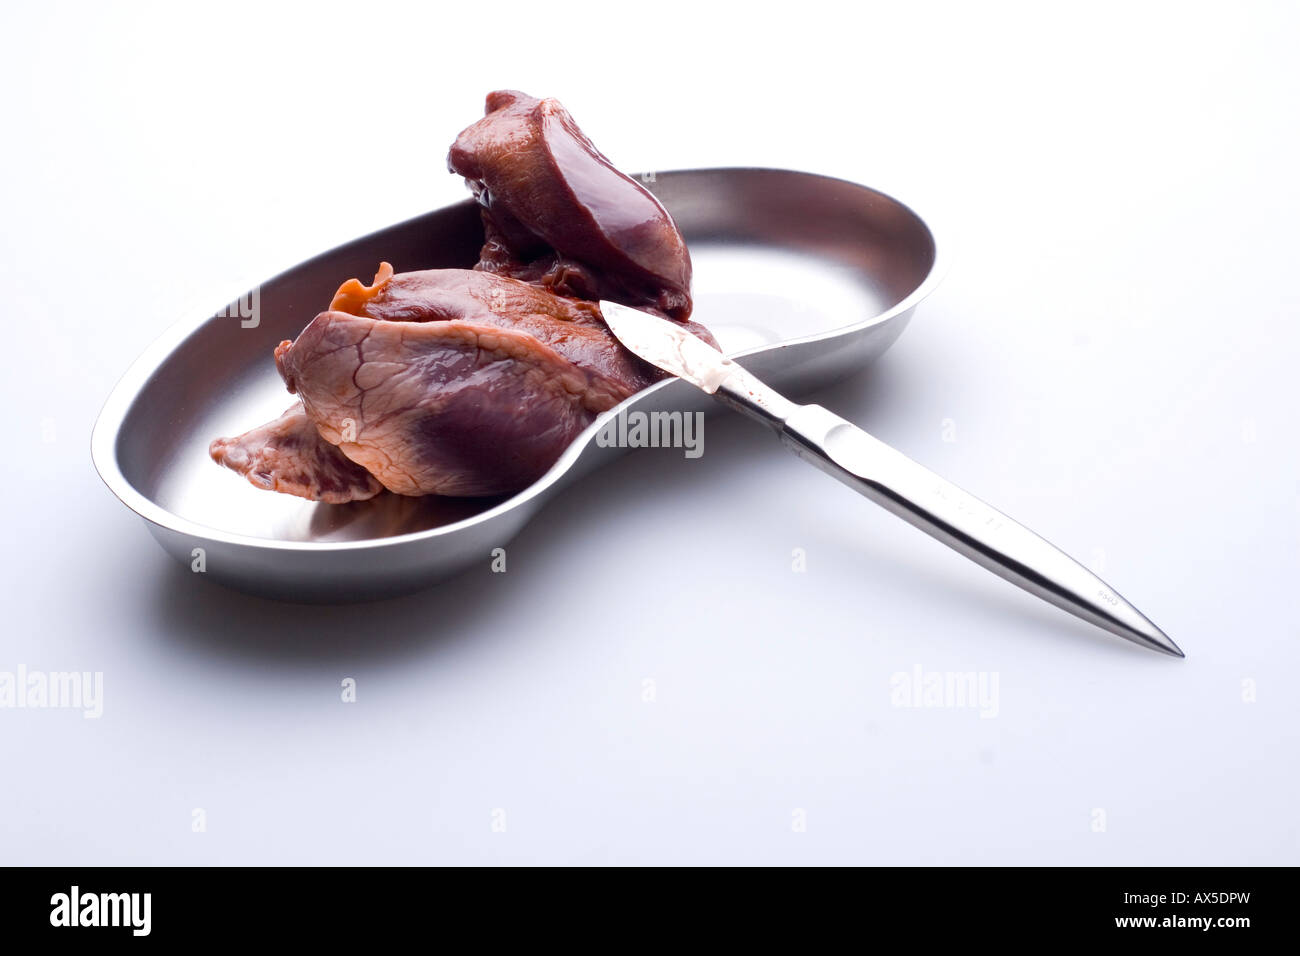 Pig heart in a kidney-shaped bowl Stock Photo